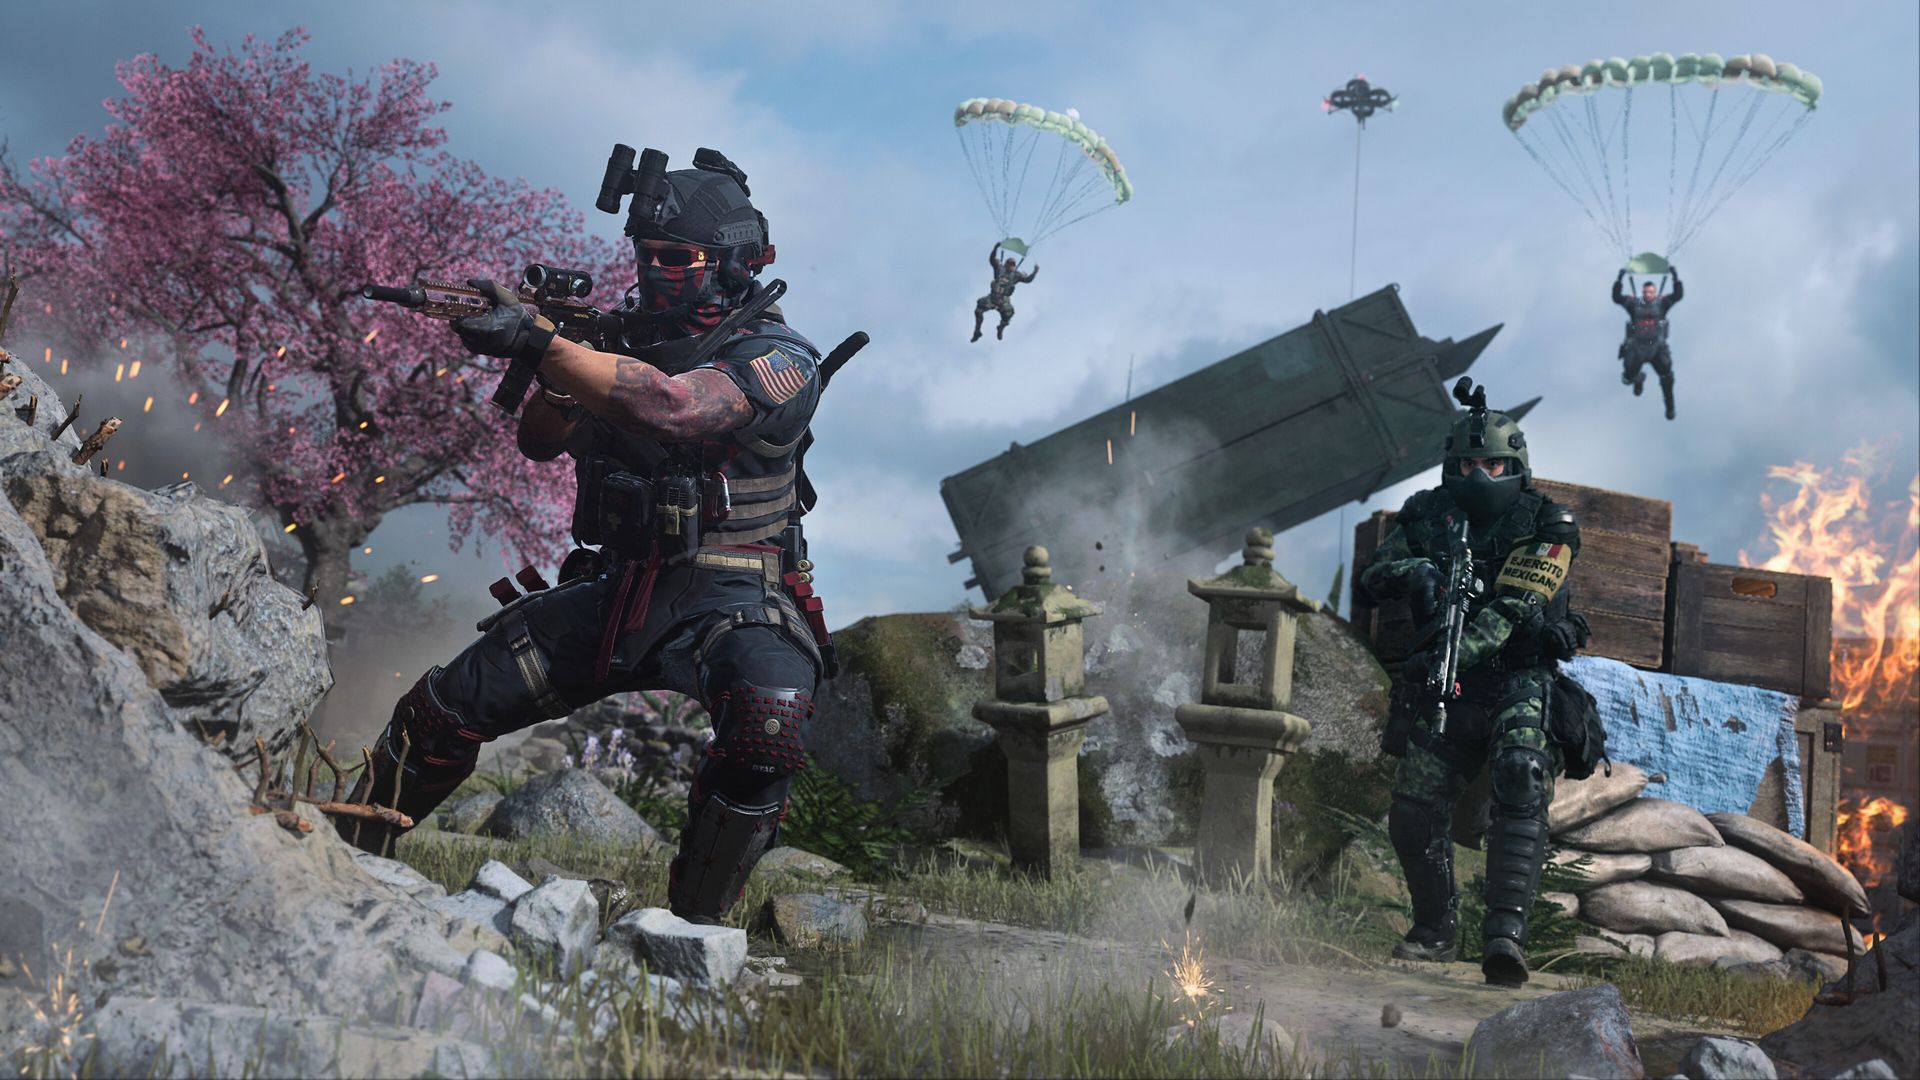 Video game screenshot of soldiers parachuting into battle